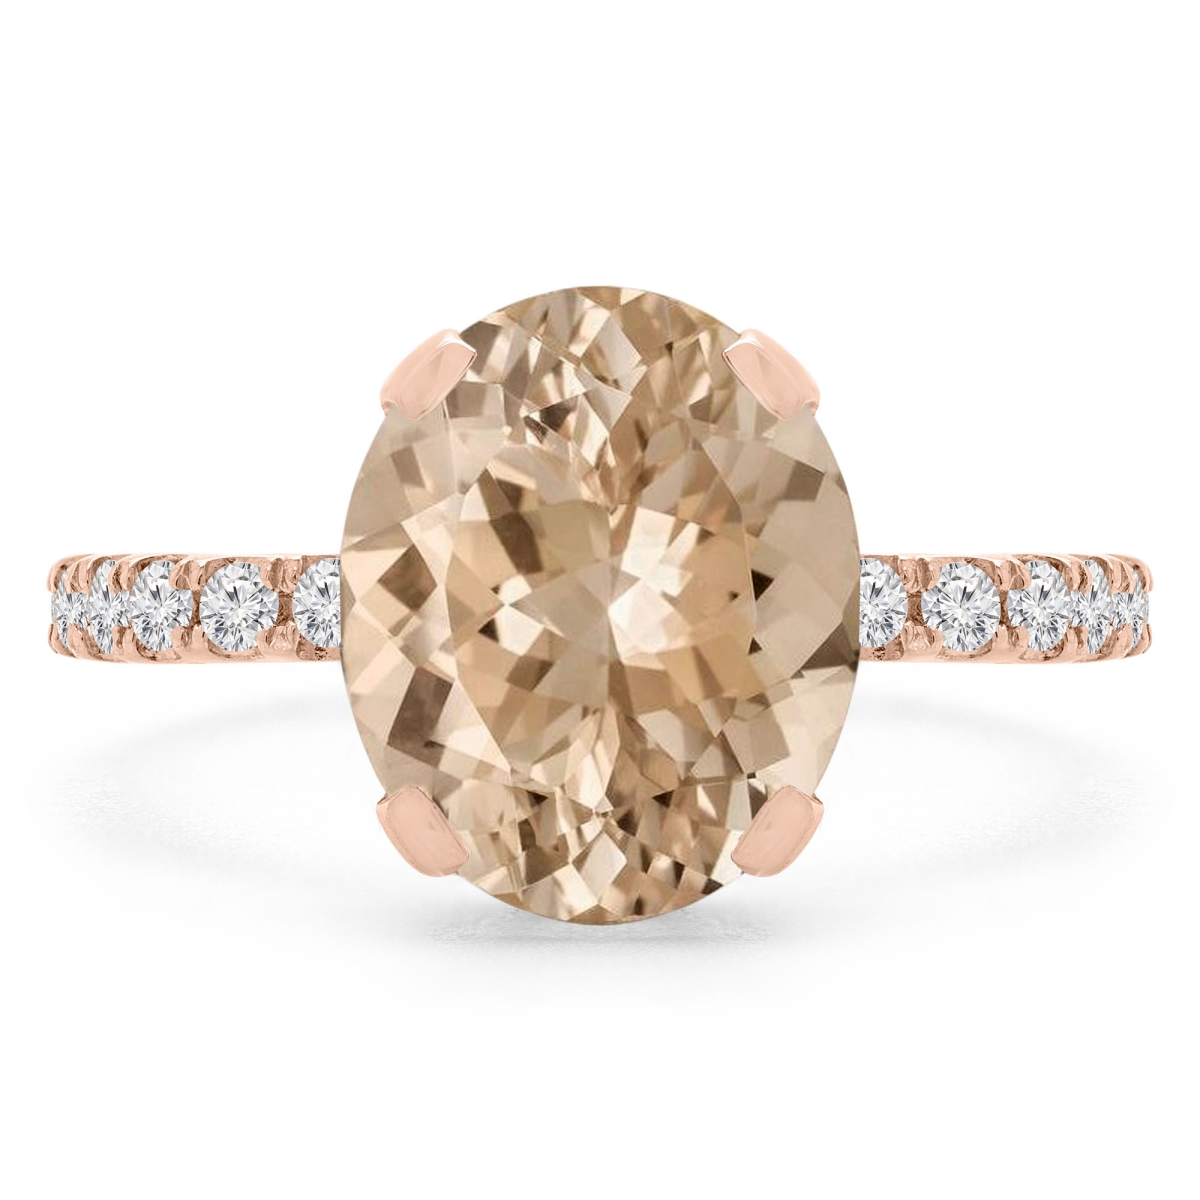 Picture of Majesty Diamonds MD190407-4.25 3.4 CTW Oval Pink Morganite Under Halo Engagement Ring in 14K Rose Gold - Size 4.25